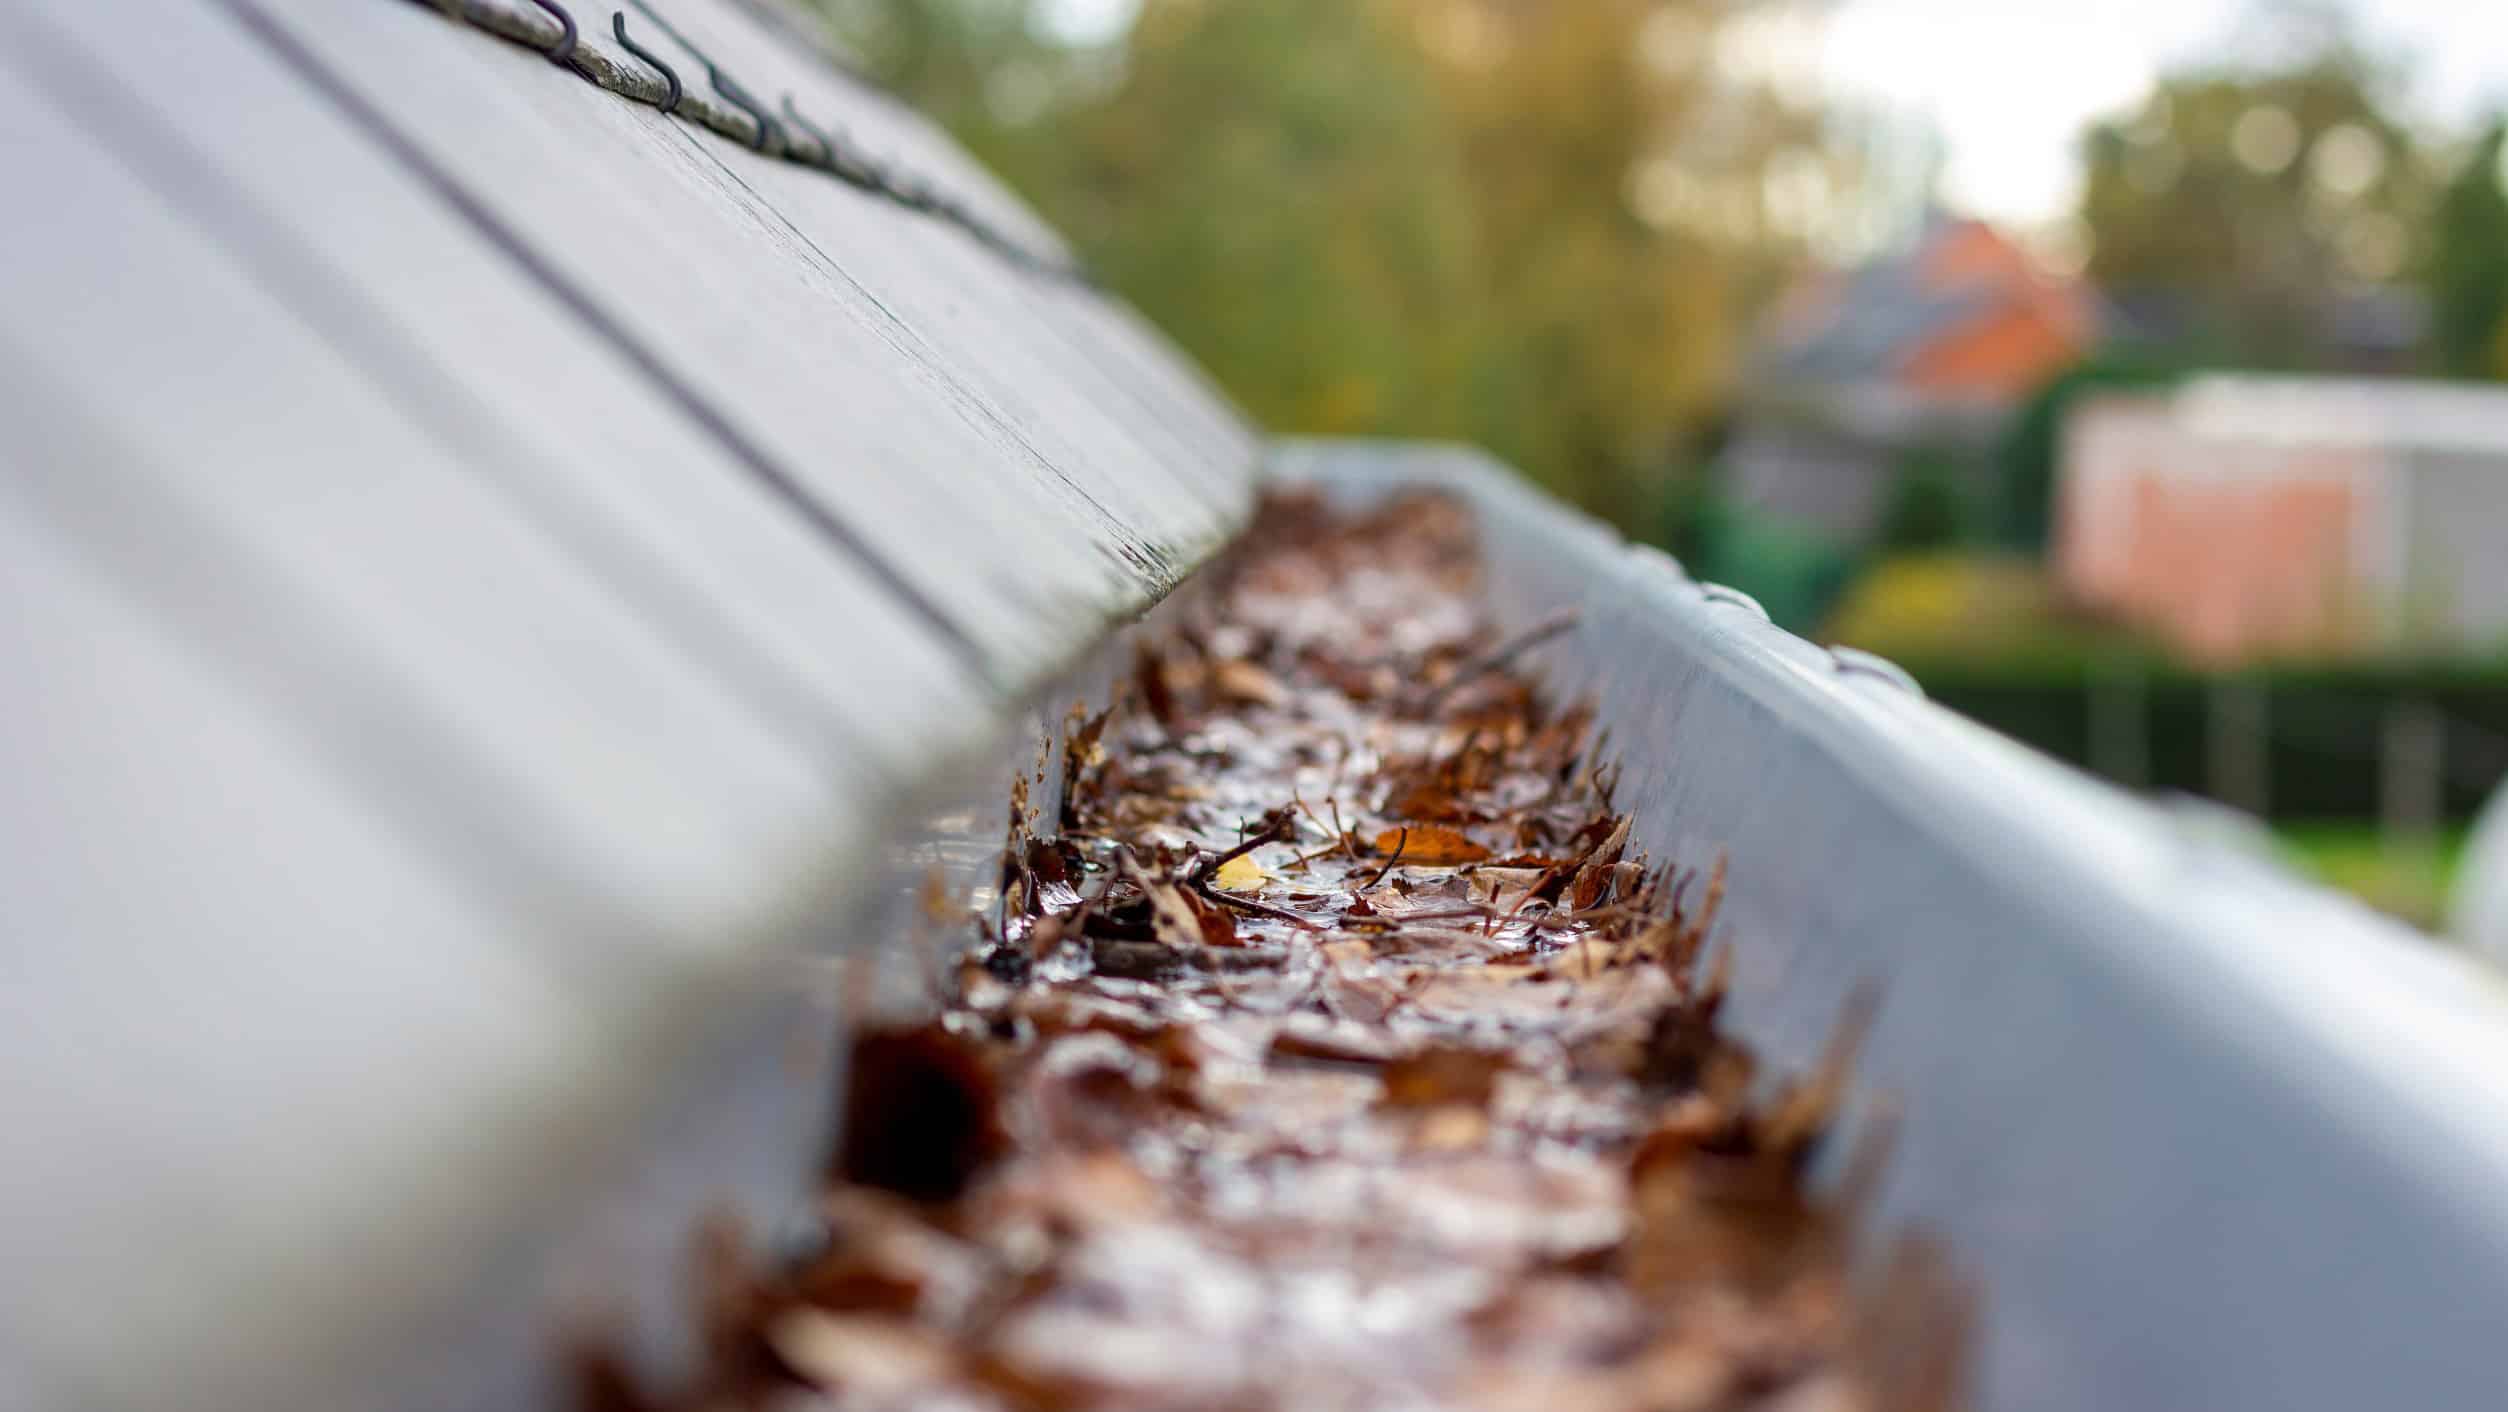 Rain falling into a clogged gutter